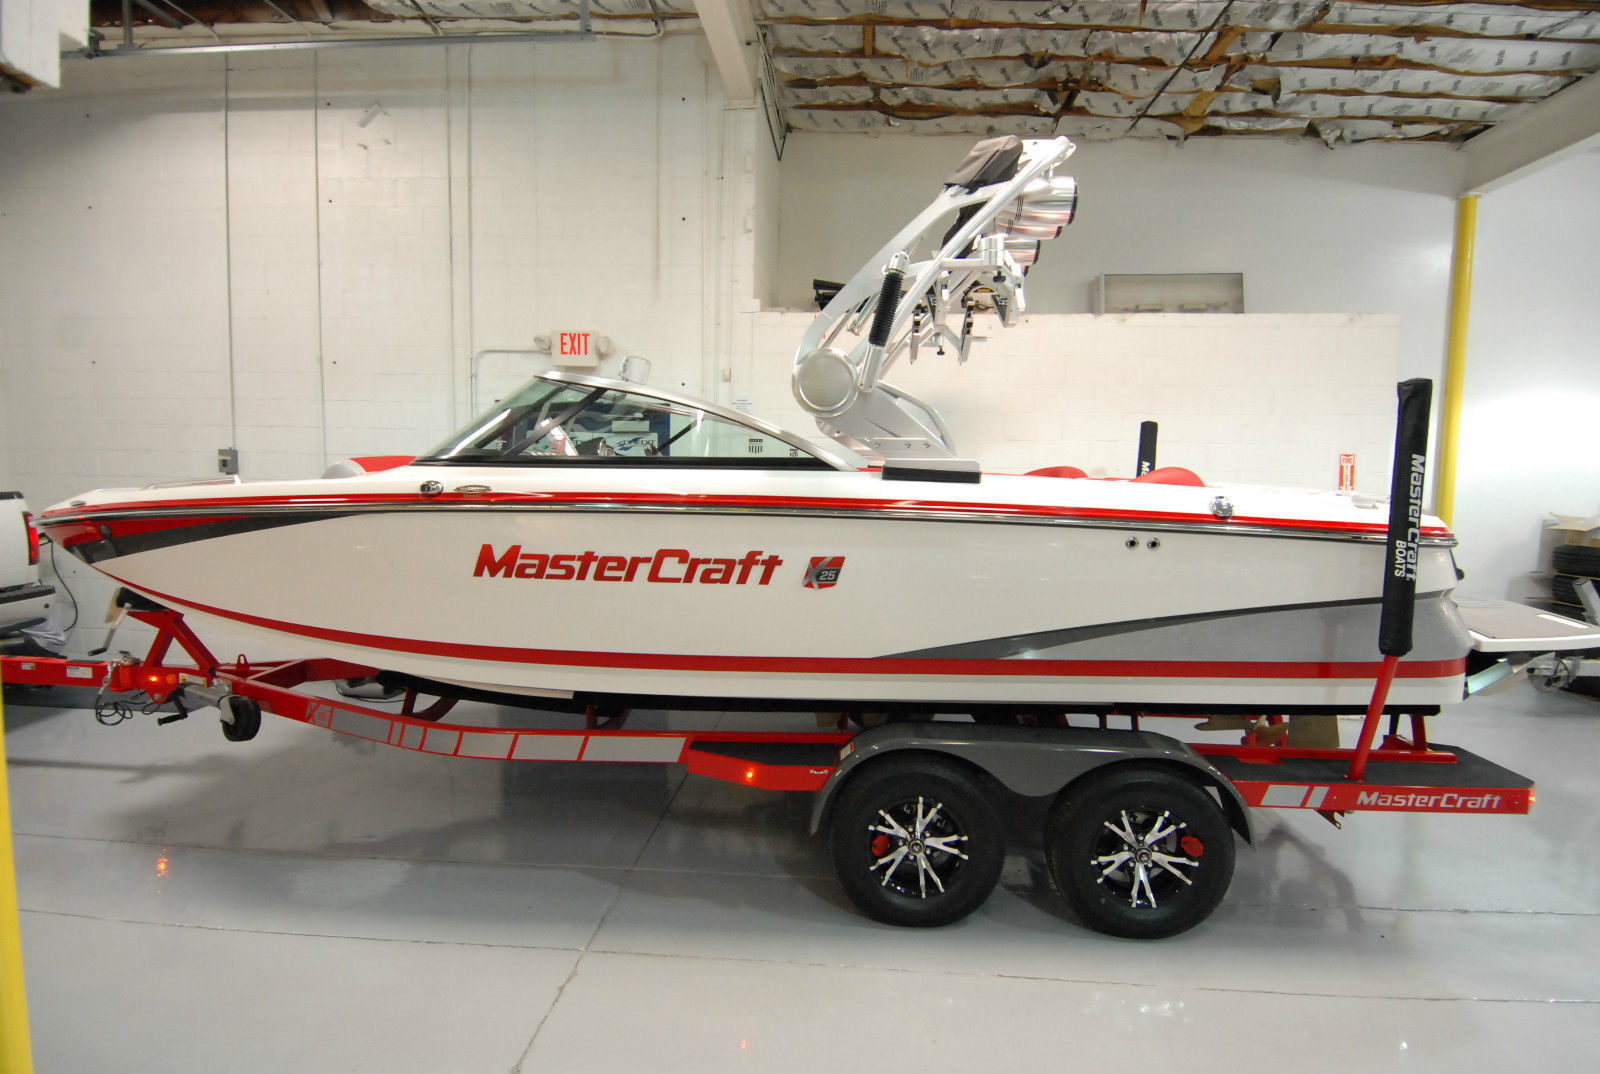 Mastercraft X-25 2014 for sale for $100 - Boats-from-USA.com